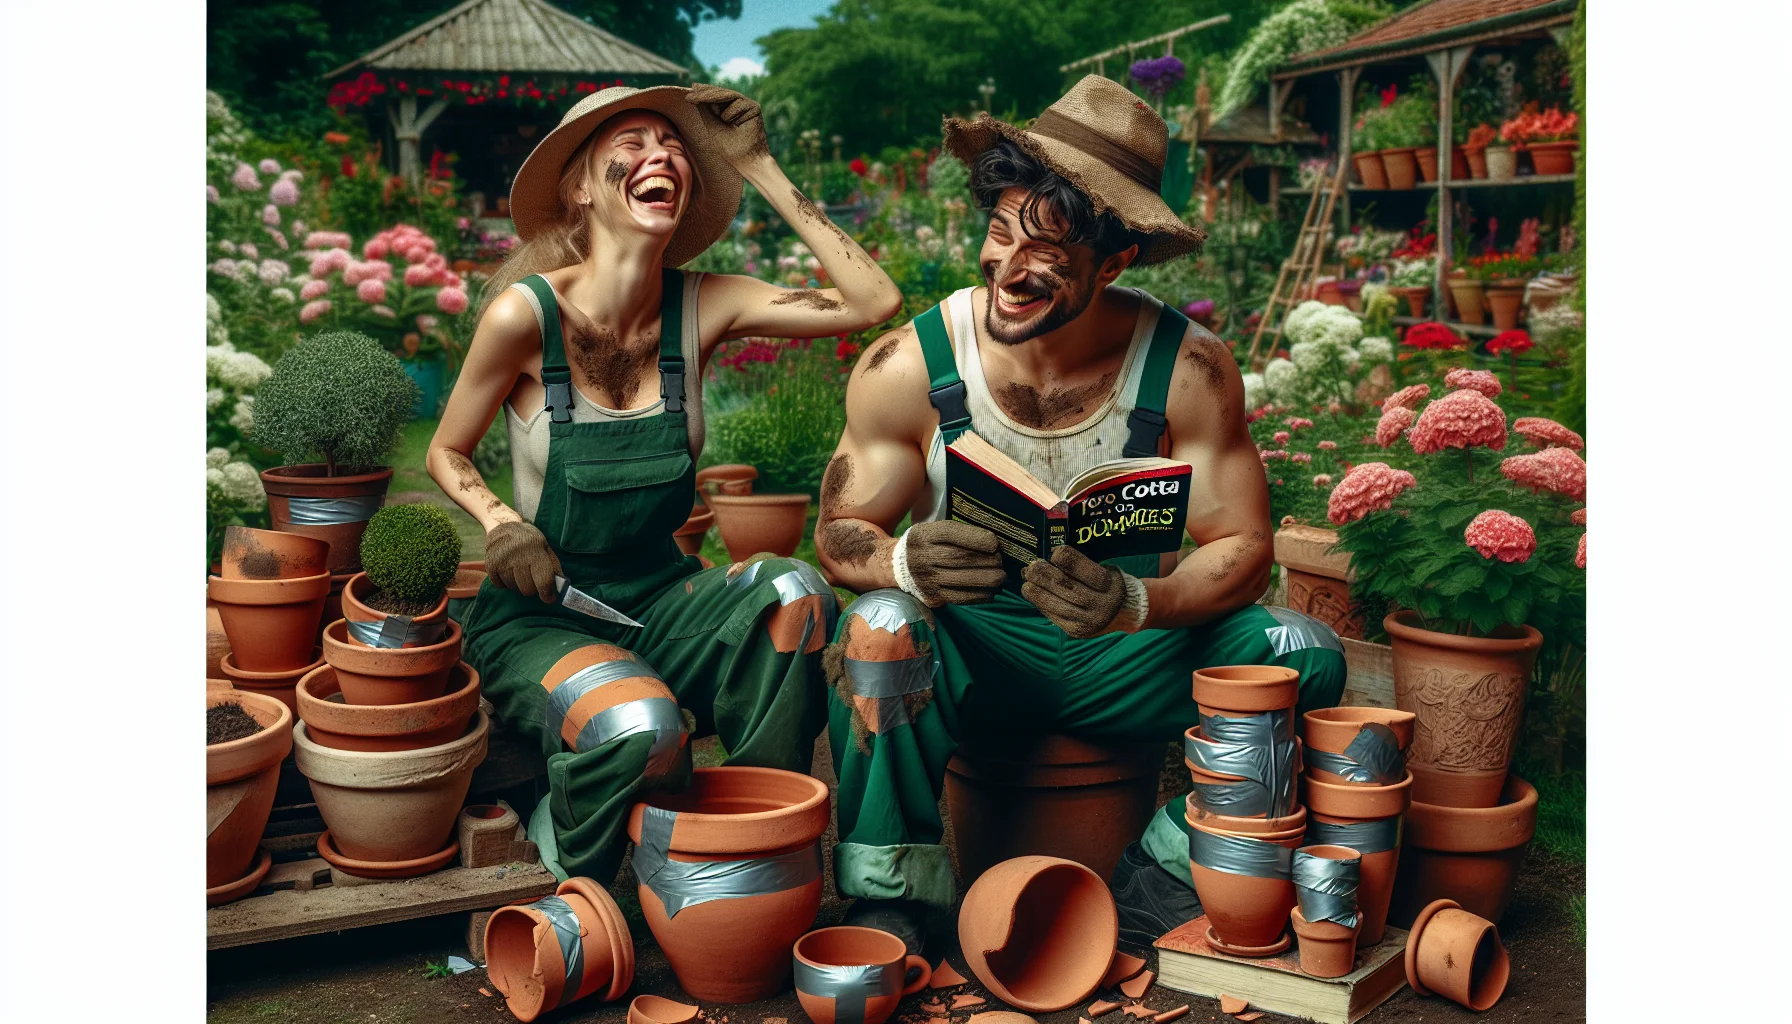 Imagine a humorous scenario in a vibrant garden. In this scene, you can see a Caucasian female gardener wearing her green overalls and sunhat, with dirt smudged on her face, laughing as she tries to repair a broken terra cotta planter with duct tape. Beside her, a Black male gardener is intently reading an old-fashioned 'Terra Cotta Repair for Dummies' book, with a puzzled expression on his face. Various broken and mended terra cotta pots are scattered around them, and a lush background of blooming flowers and well-tended green plants adds to the delightful and inviting atmosphere.